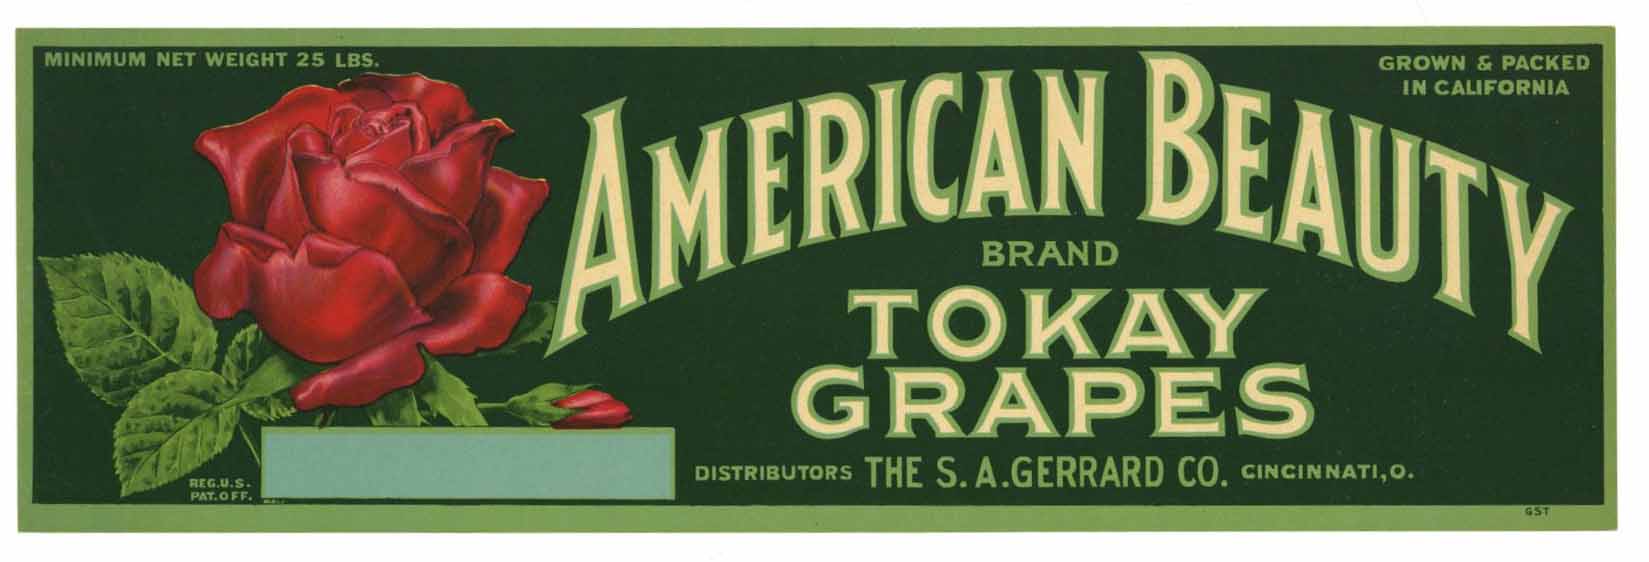 American Beauty Brand Vintage Grape Crate Label